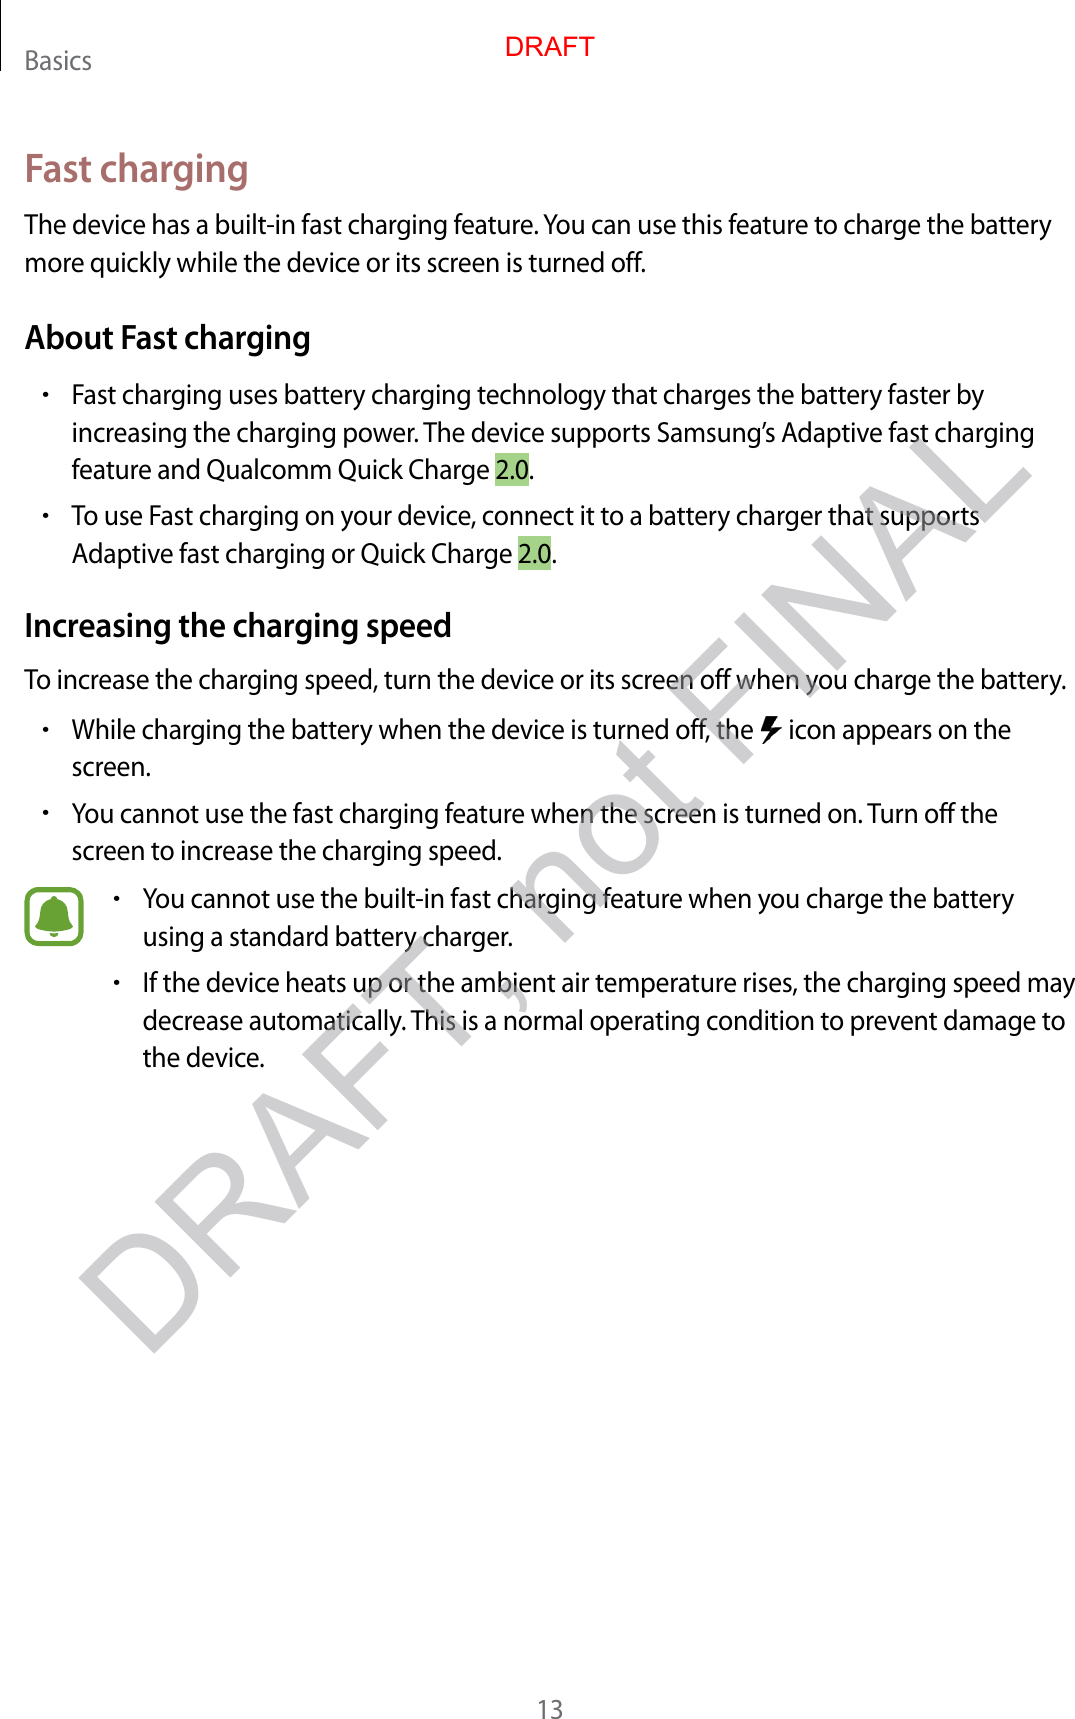 Basics13Fast chargingThe device has a built -in fast charg ing f ea tur e . You can use this featur e to char ge the batt ery more quickly while the device or its screen is turned off.About Fast charging•Fast charg ing uses batt ery charging technology that charges the ba ttery faster by increasing the char ging po w er. The device supports Samsung ’s Adaptiv e fast char ging featur e and Qualc omm Quick Charge 2.0.•To use Fast charg ing on y our device, connect it to a batt ery charger that supports Adaptiv e fast char ging or Quick Char ge 2.0.Increasing the charg ing speedTo increase the char ging speed , turn the device or its scr een off when y ou char ge the ba ttery.•While charg ing the batt ery when the device is turned off , the   icon appears on the screen.•You cannot use the fast charging featur e when the screen is turned on.  Turn off the screen to incr ease the char g ing speed .•You cannot use the built-in fast charging f eatur e when y ou char ge the batt ery using a standard batt ery charger.•If the device heats up or the ambient air tempera tur e rises, the char g ing speed ma y decrease automa tically. T his is a normal operating c ondition to pr ev en t damage to the device .DRAFTDRAFT, not FINAL